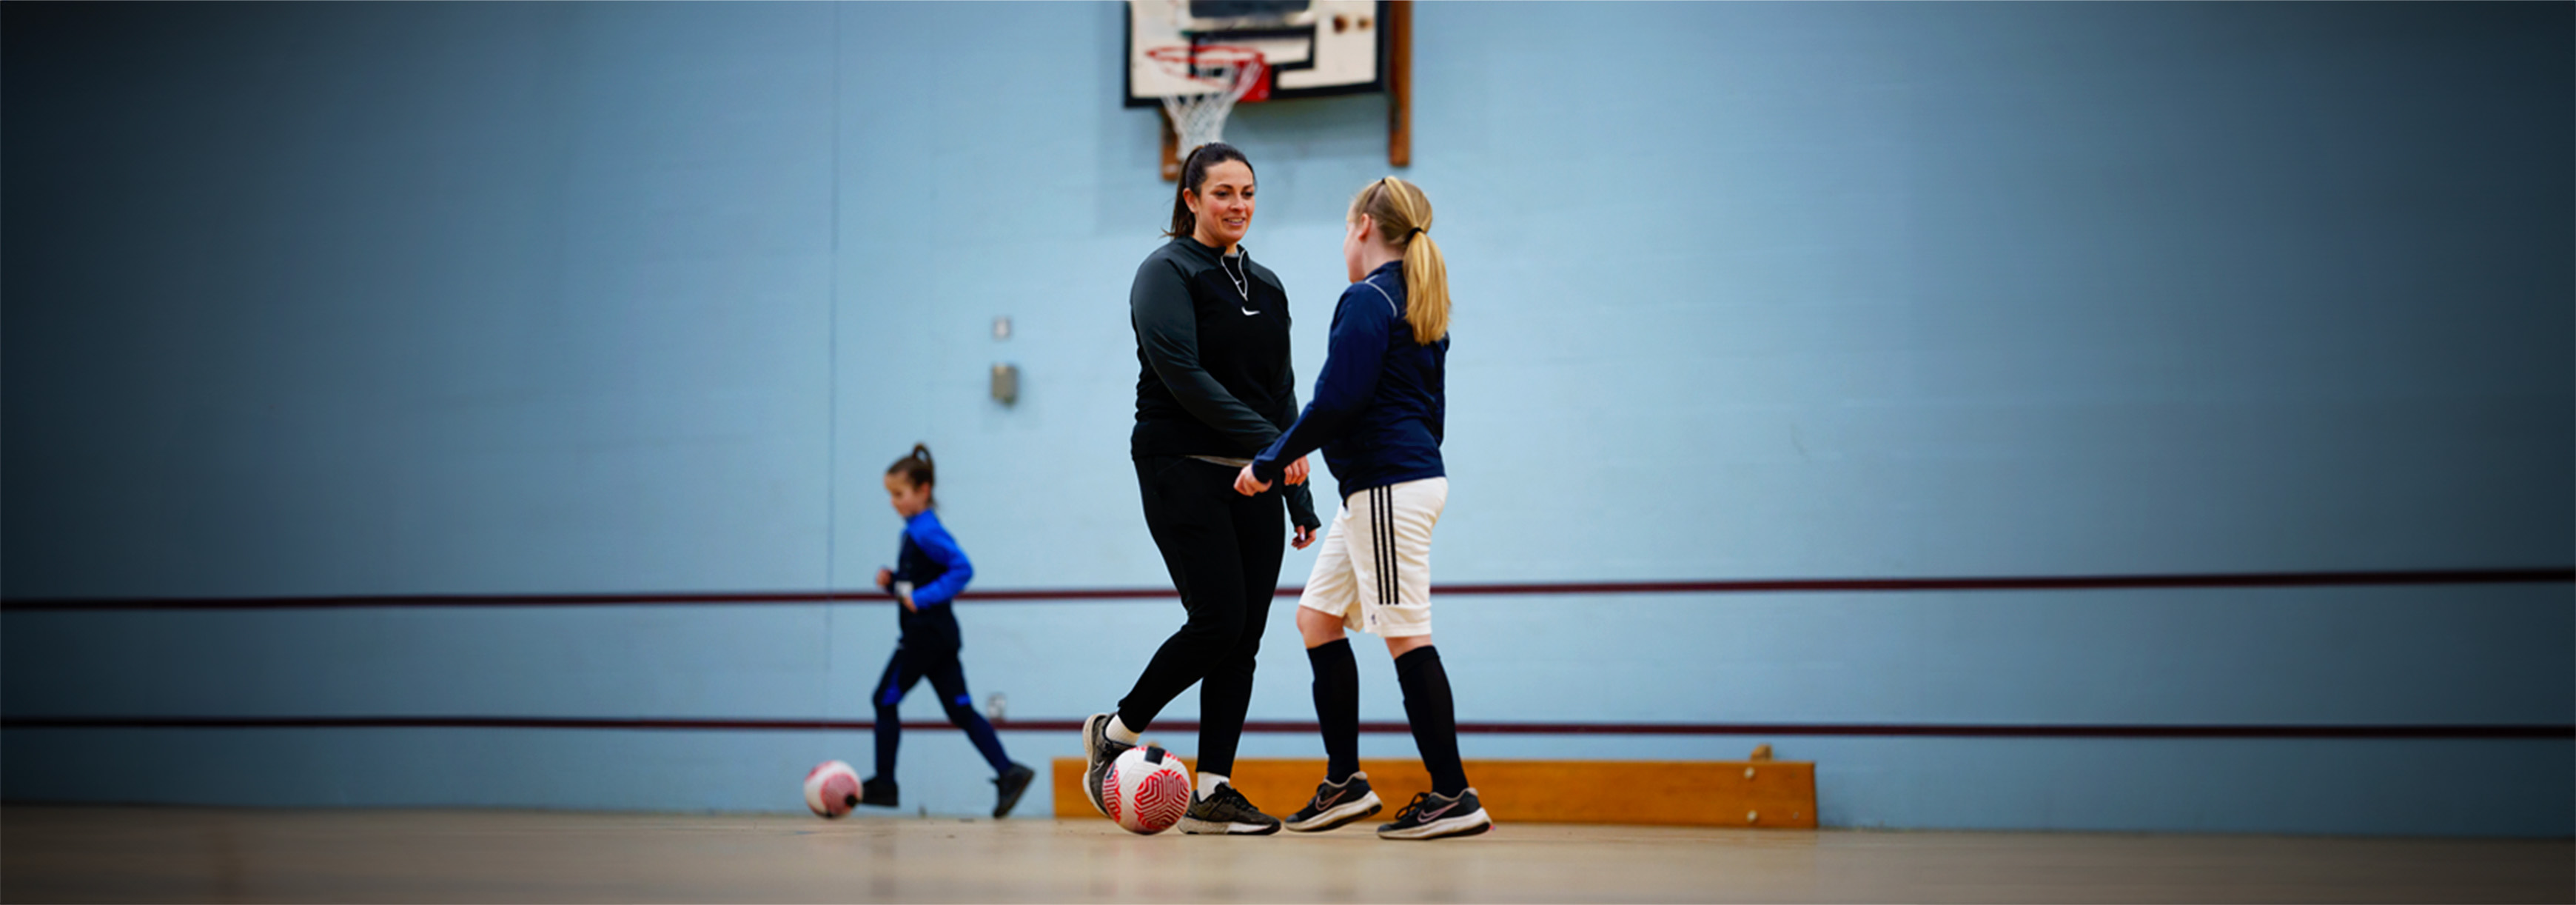 A coach talks to a player during a training session on an indoor sports hall.